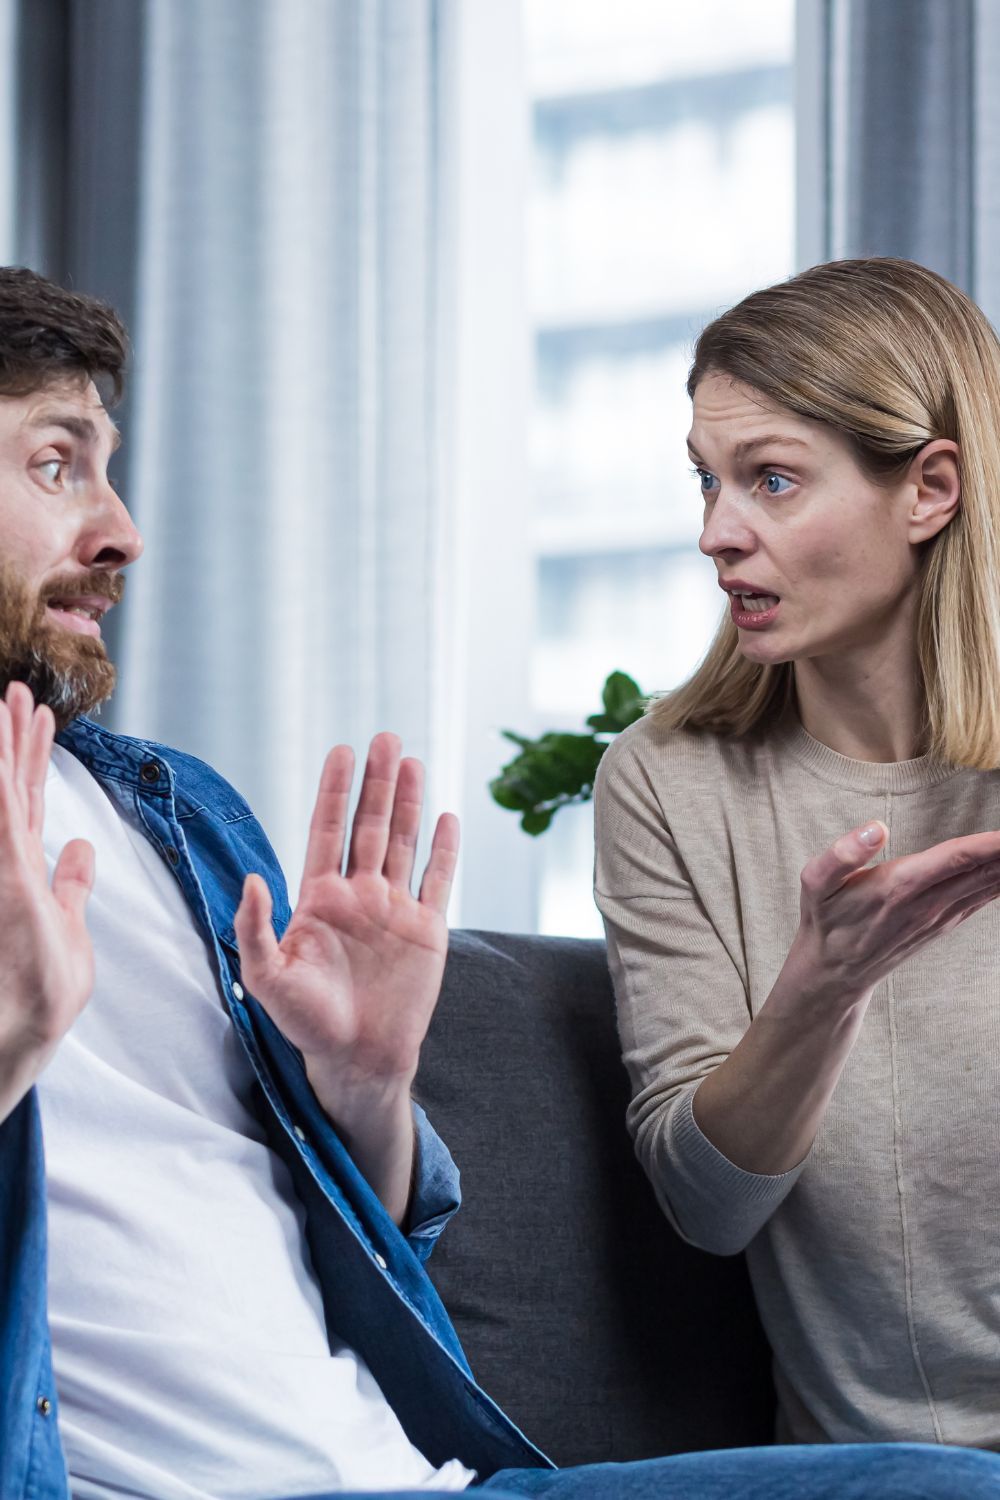 7 Things a married woman should never assume about her husband